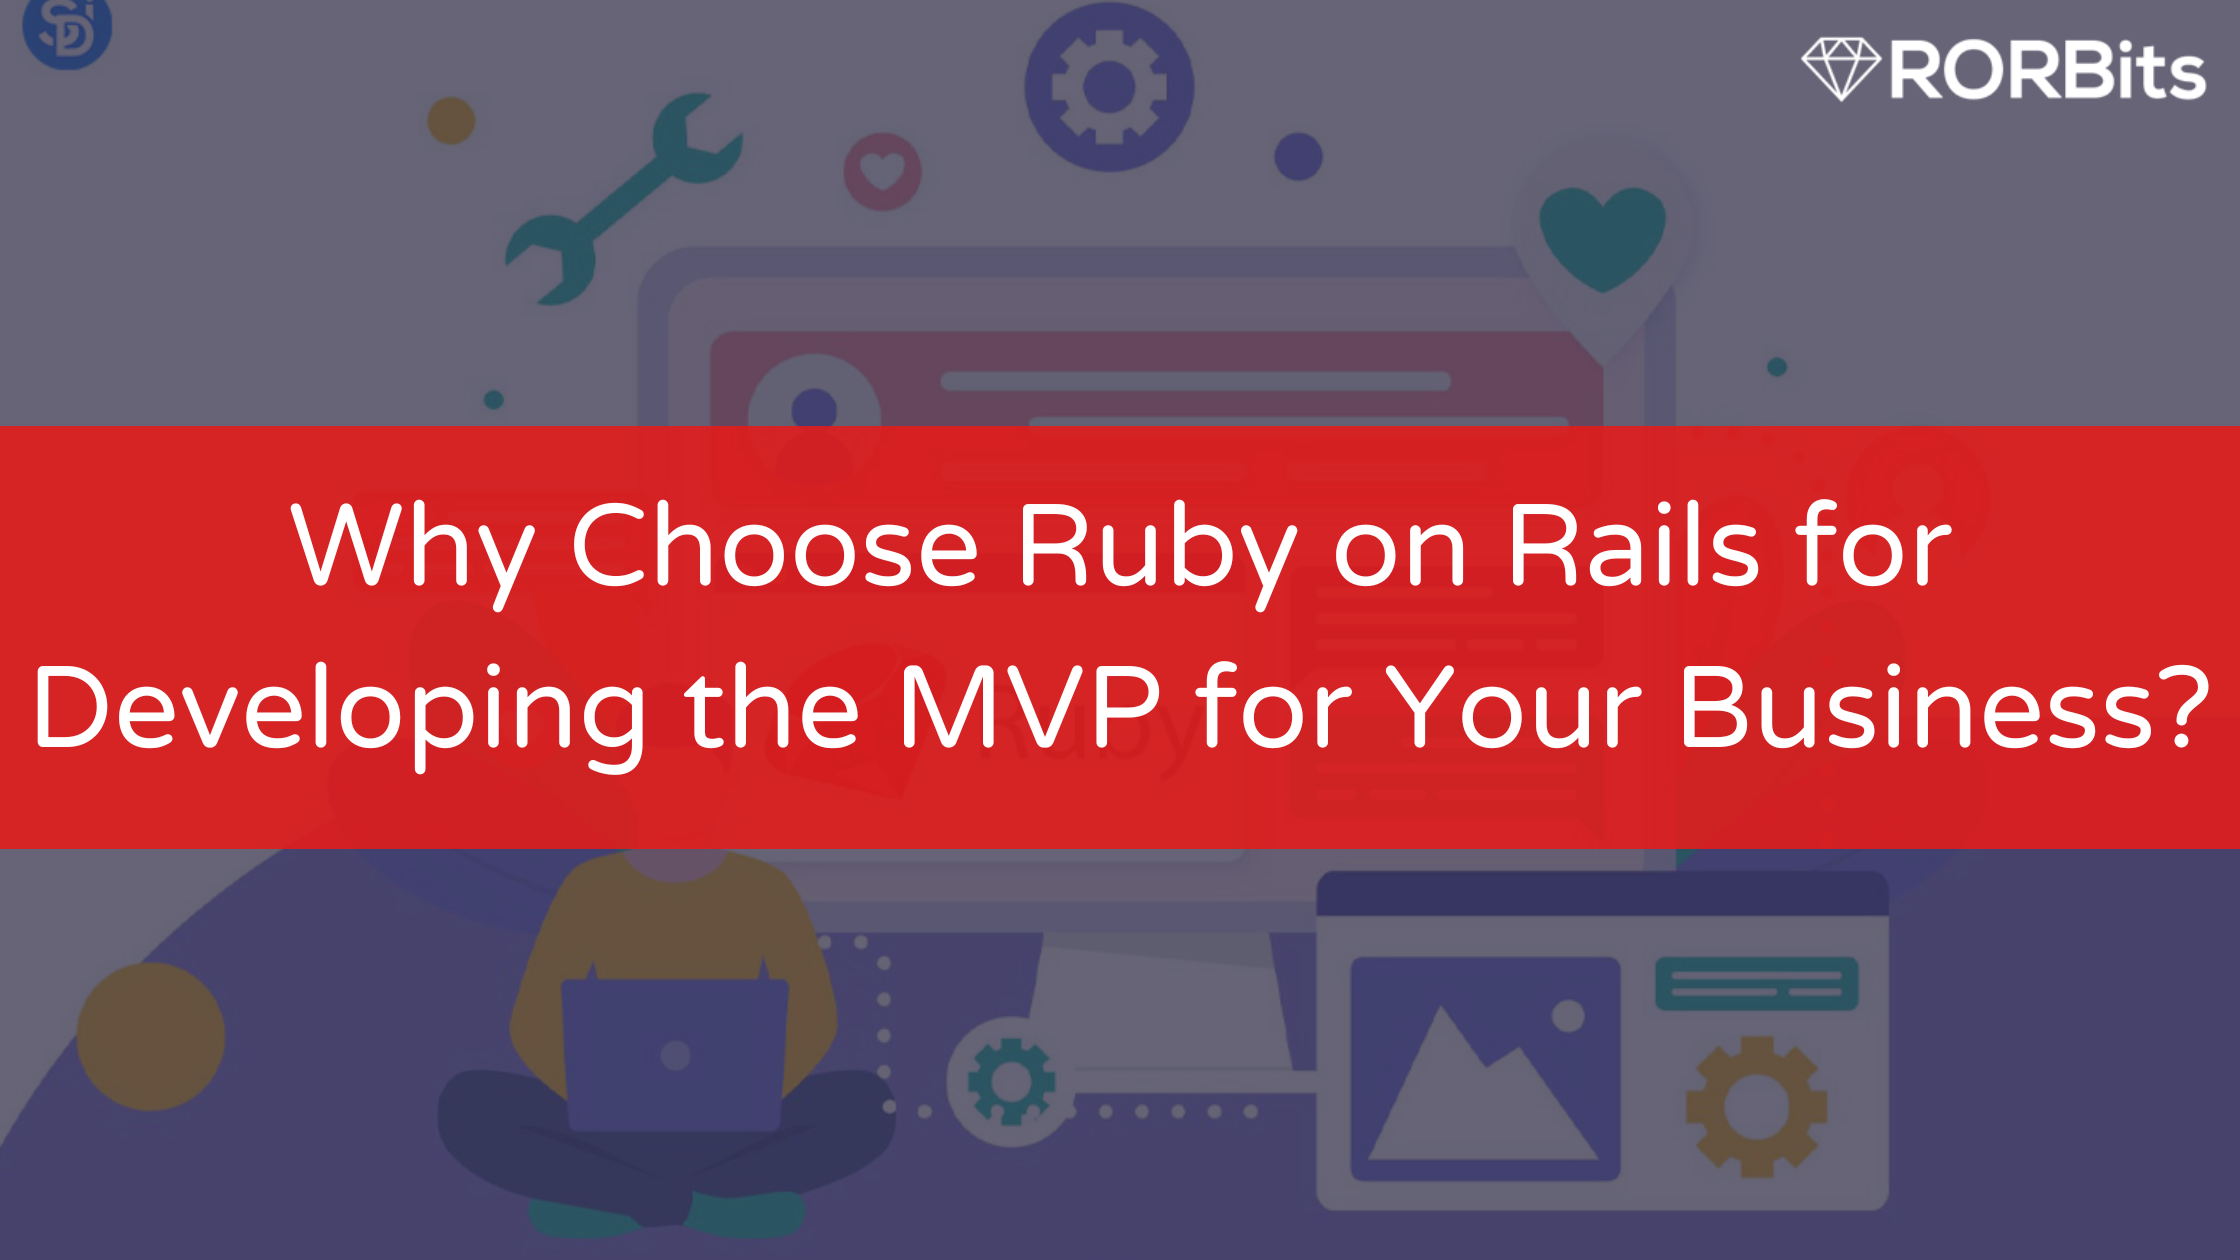 Why Choose Ruby on Rails for Developing the MVP for Your Business?